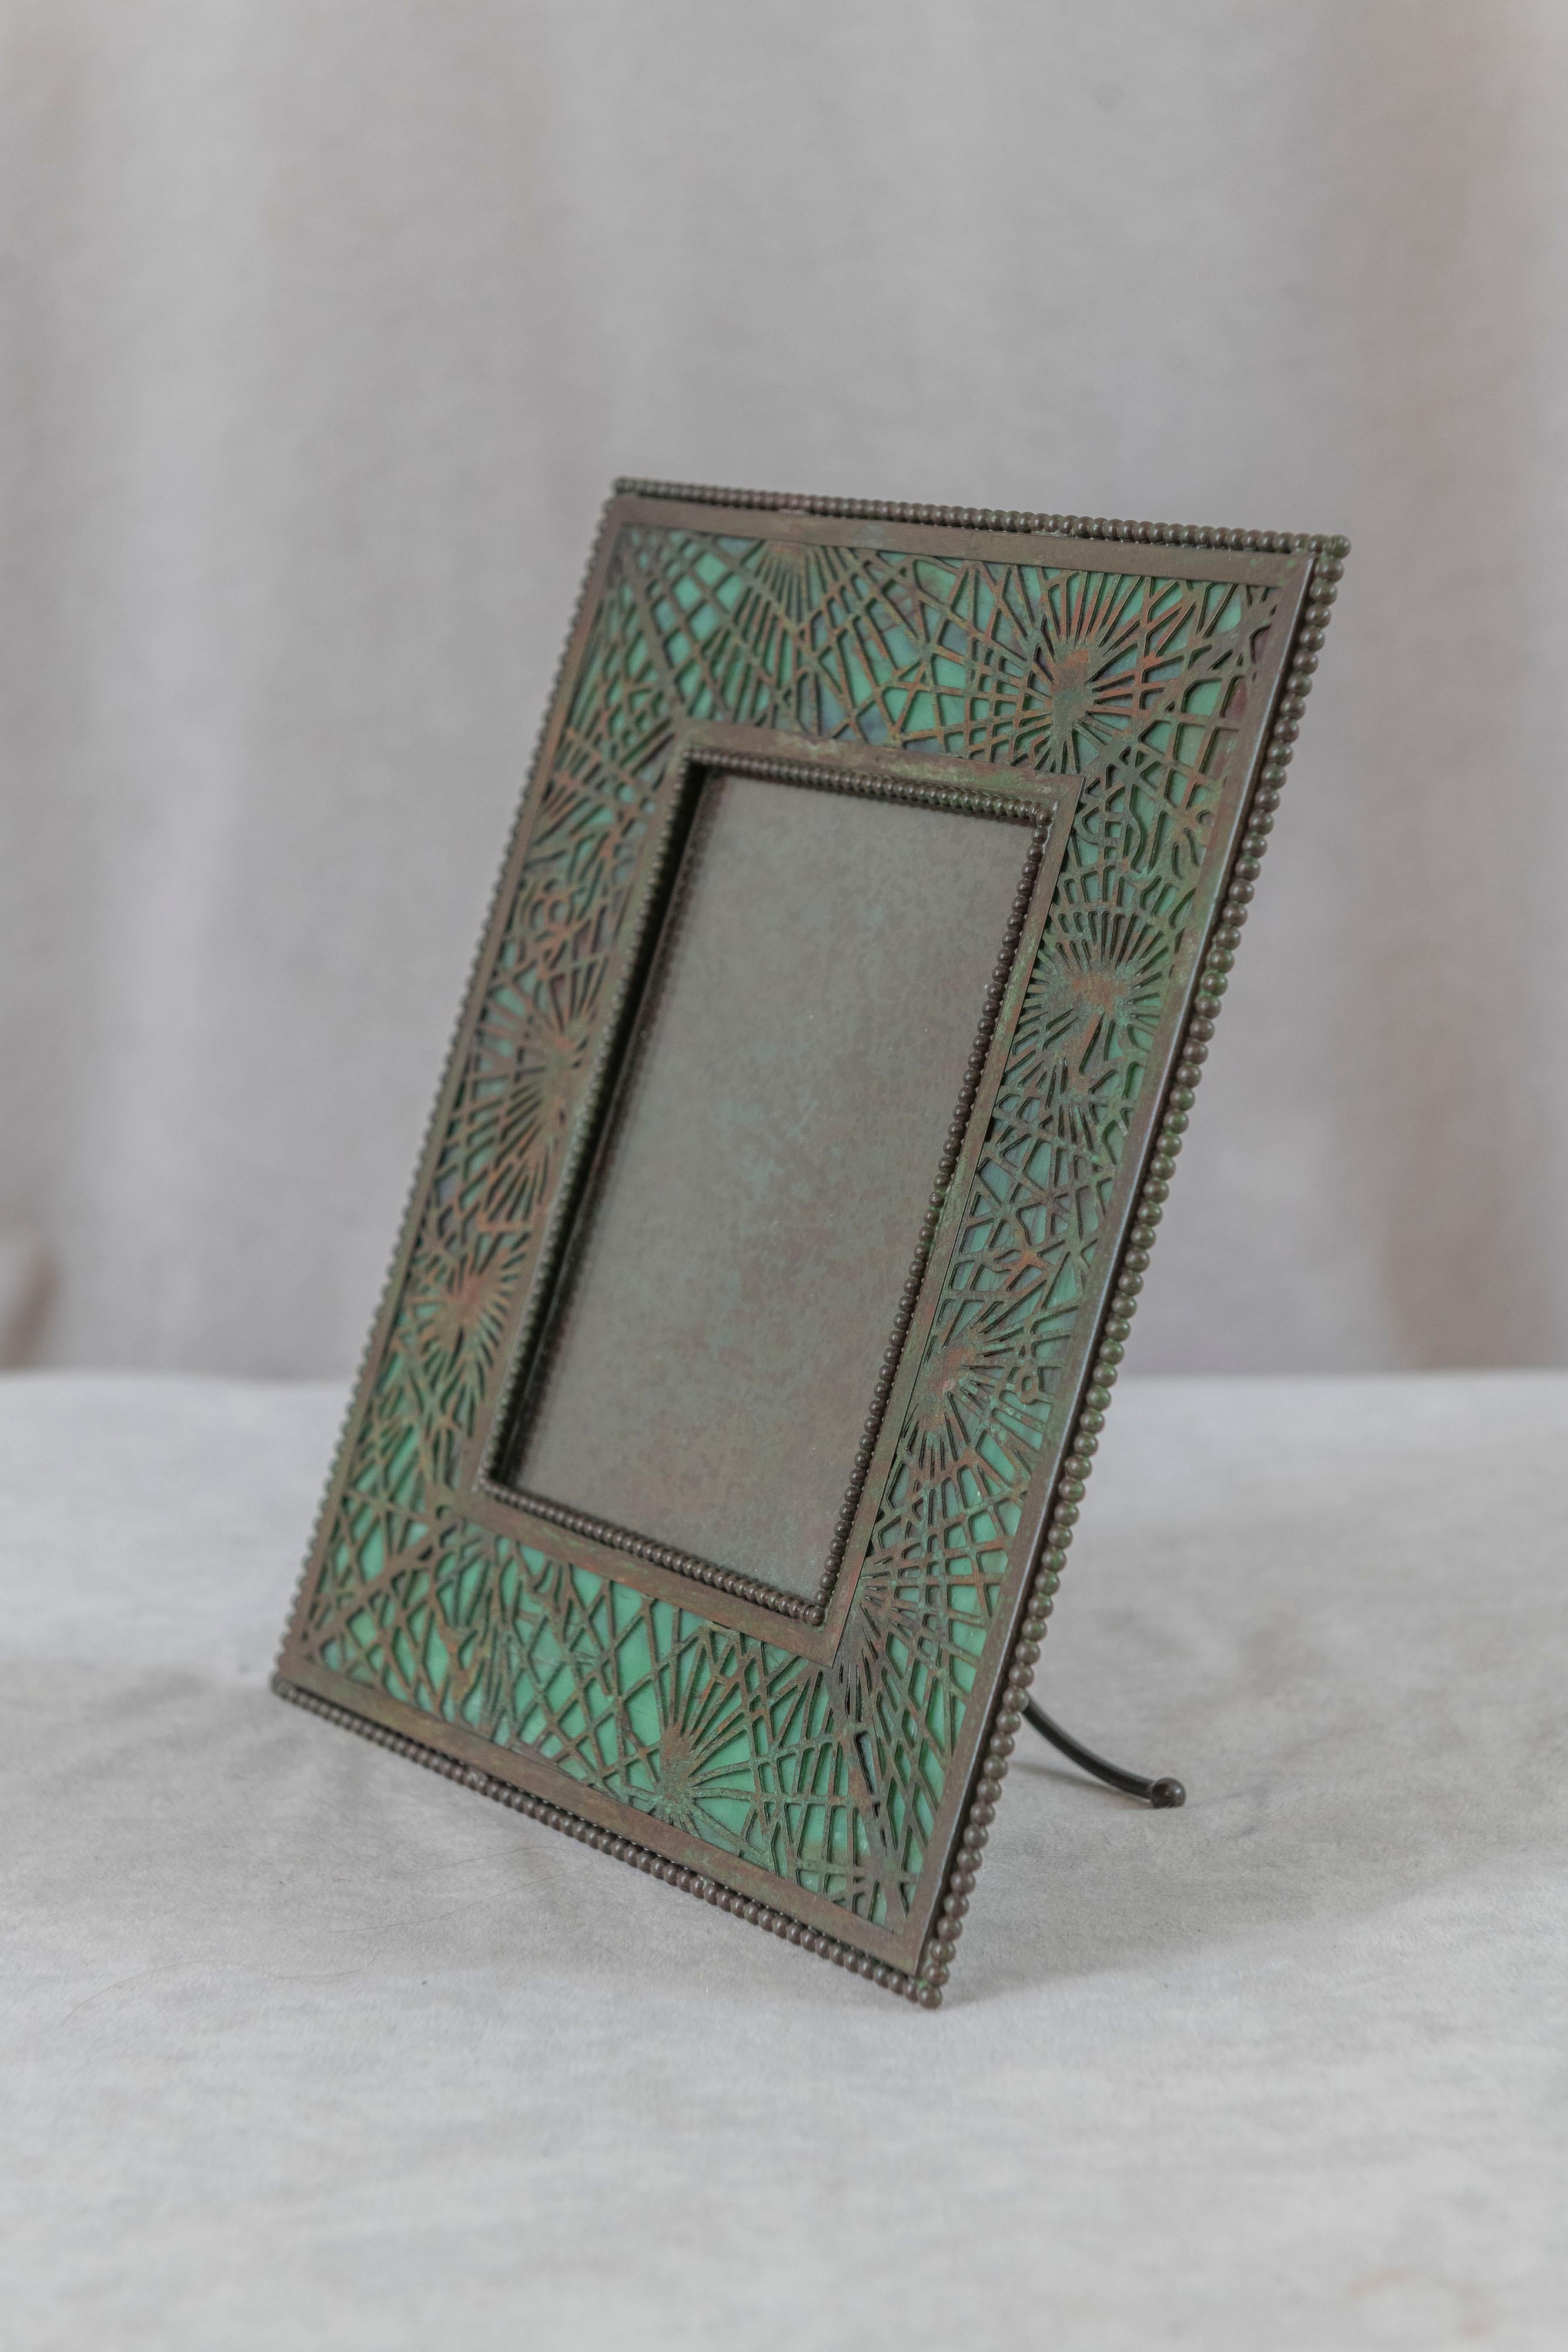  This picture frame was made by the best, Tiffany Studios. Beautiful pine needle design in green patina and colorful glass behind the work. Better glass than normally found on these frames. Properly signed on the pack and all glass intact.
  A real